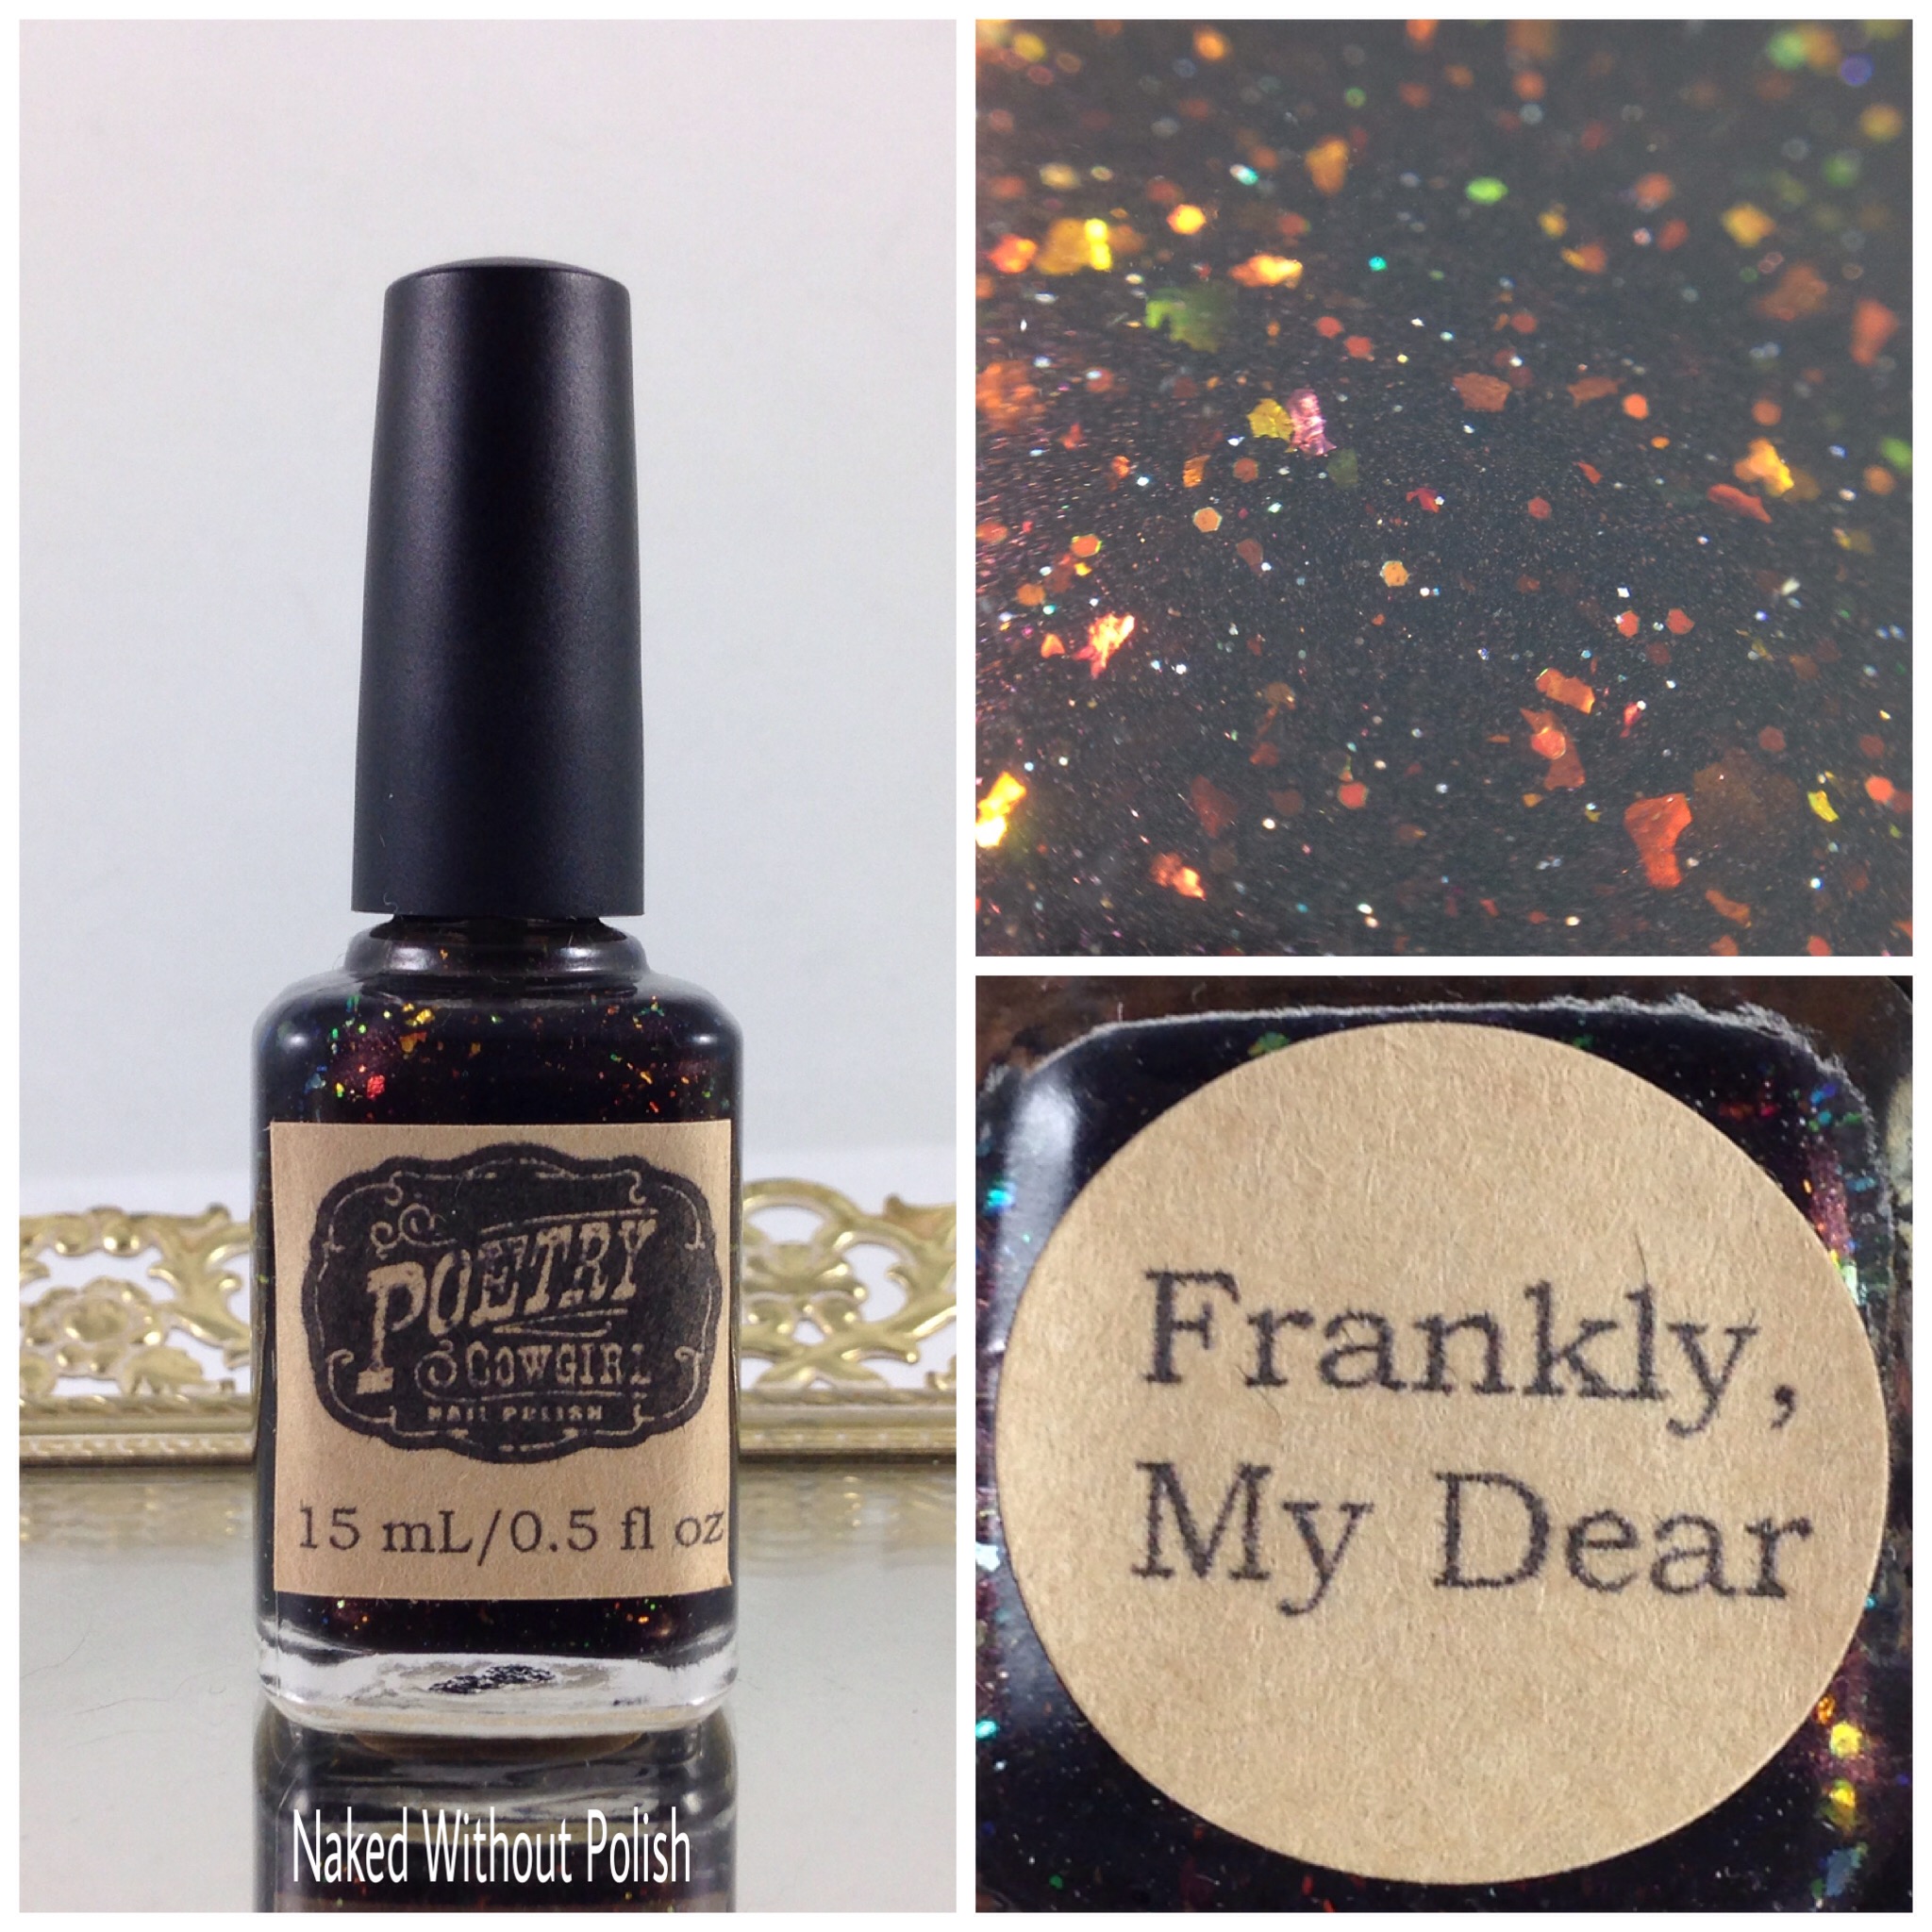 Polish-Pickup-Poetry-Cowgirl-Nail-Polish-Frankly-My-Dear-1